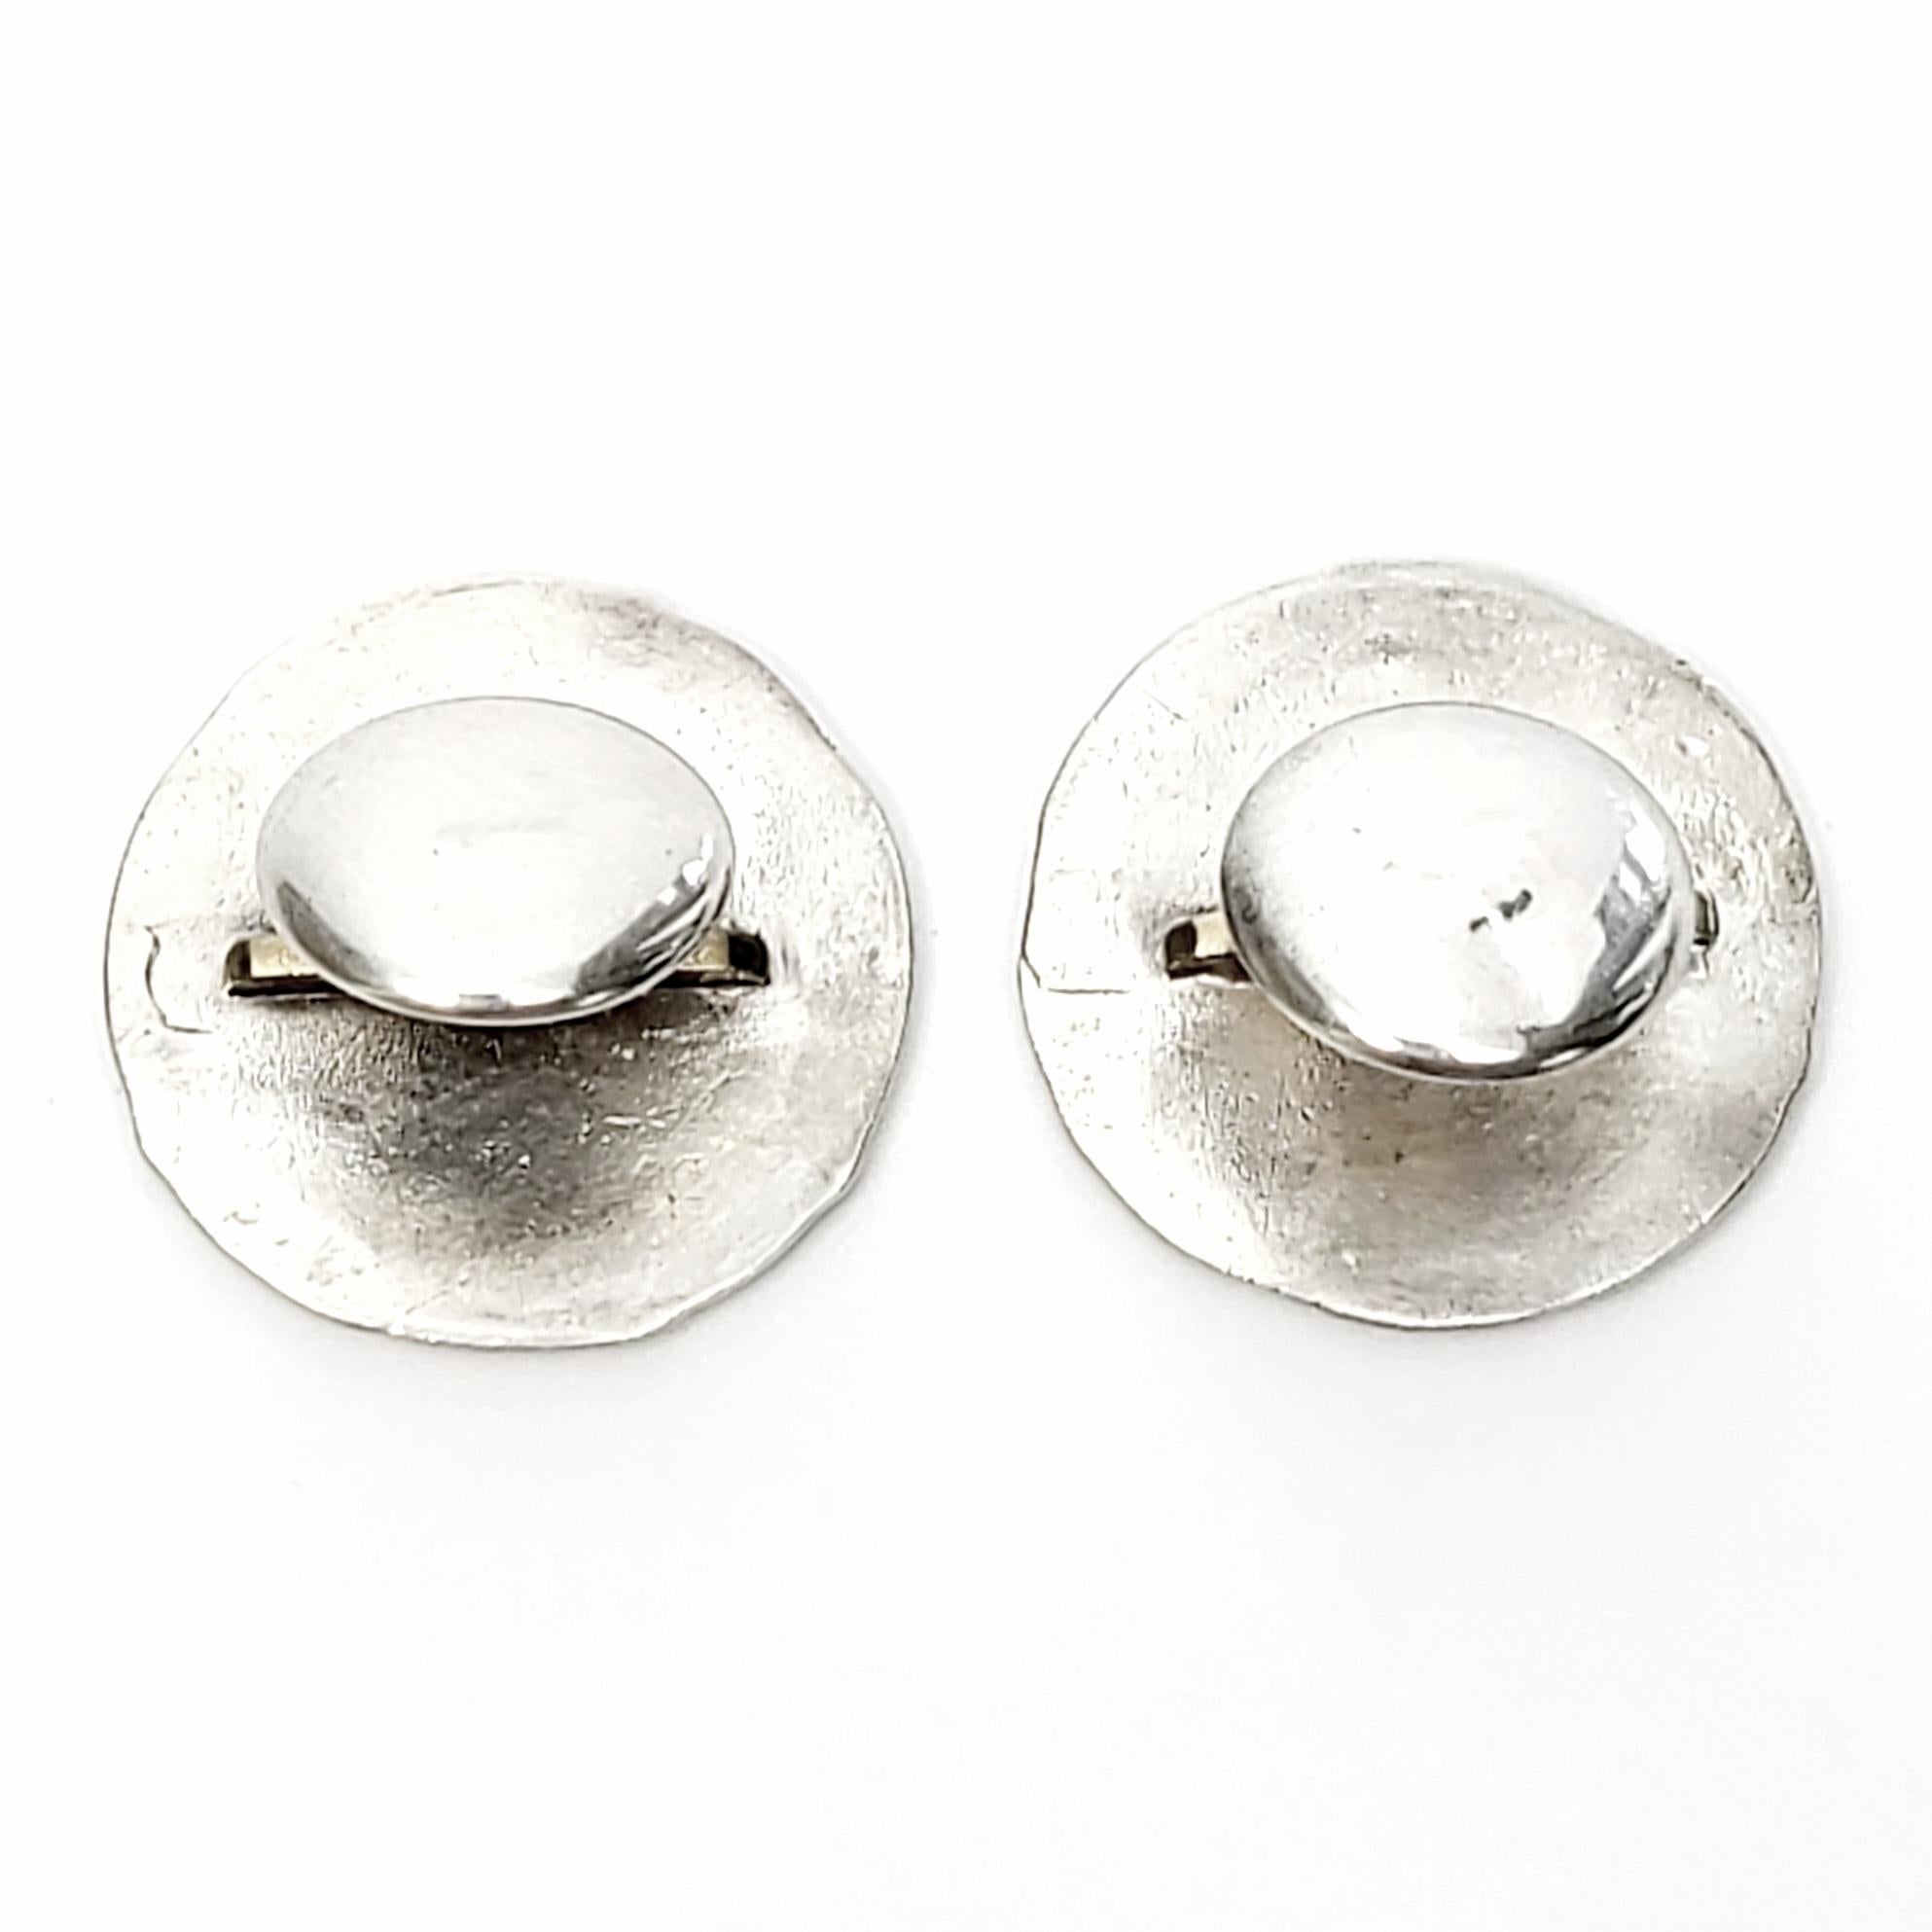 Victorian 900 silver cuff links by ACME.

Exceptional example of Edwardian design, each cufflink features a helmeted man in profile. X-ray tested for 90% silver.

Measures 1 3/16